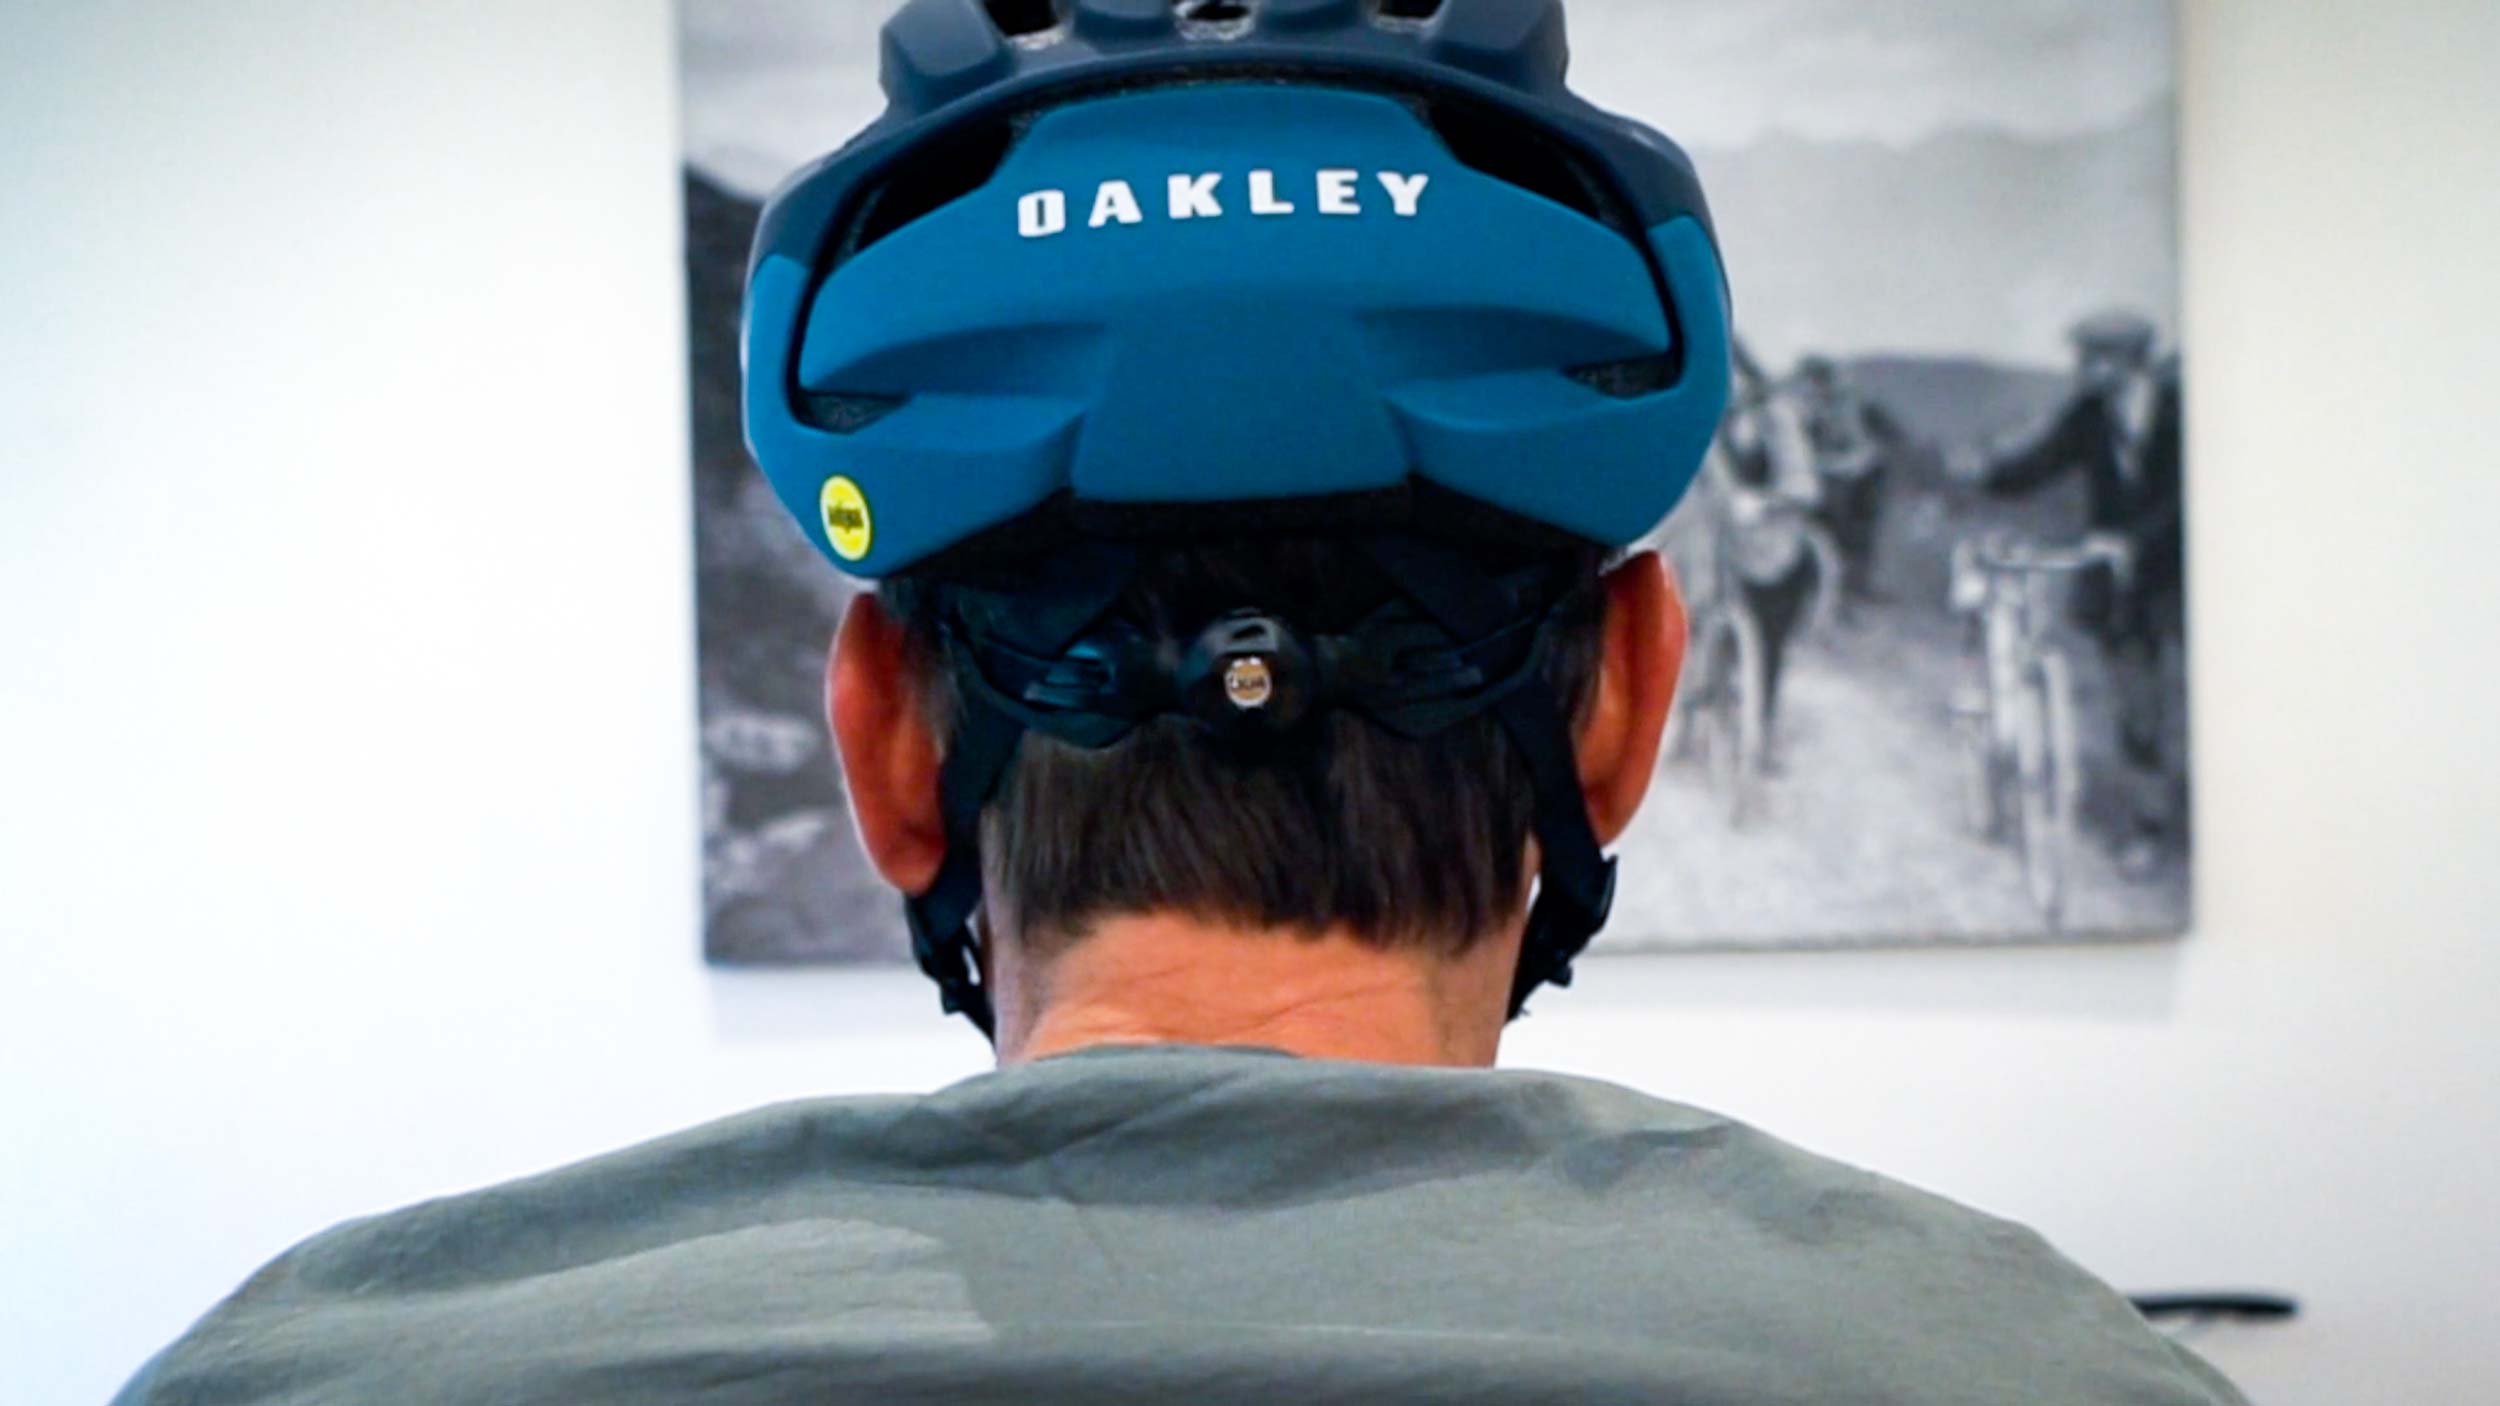 Oakley ARO3 helmet unboxing / review: first look, fitting and matching with  sunglasses - Ride Media